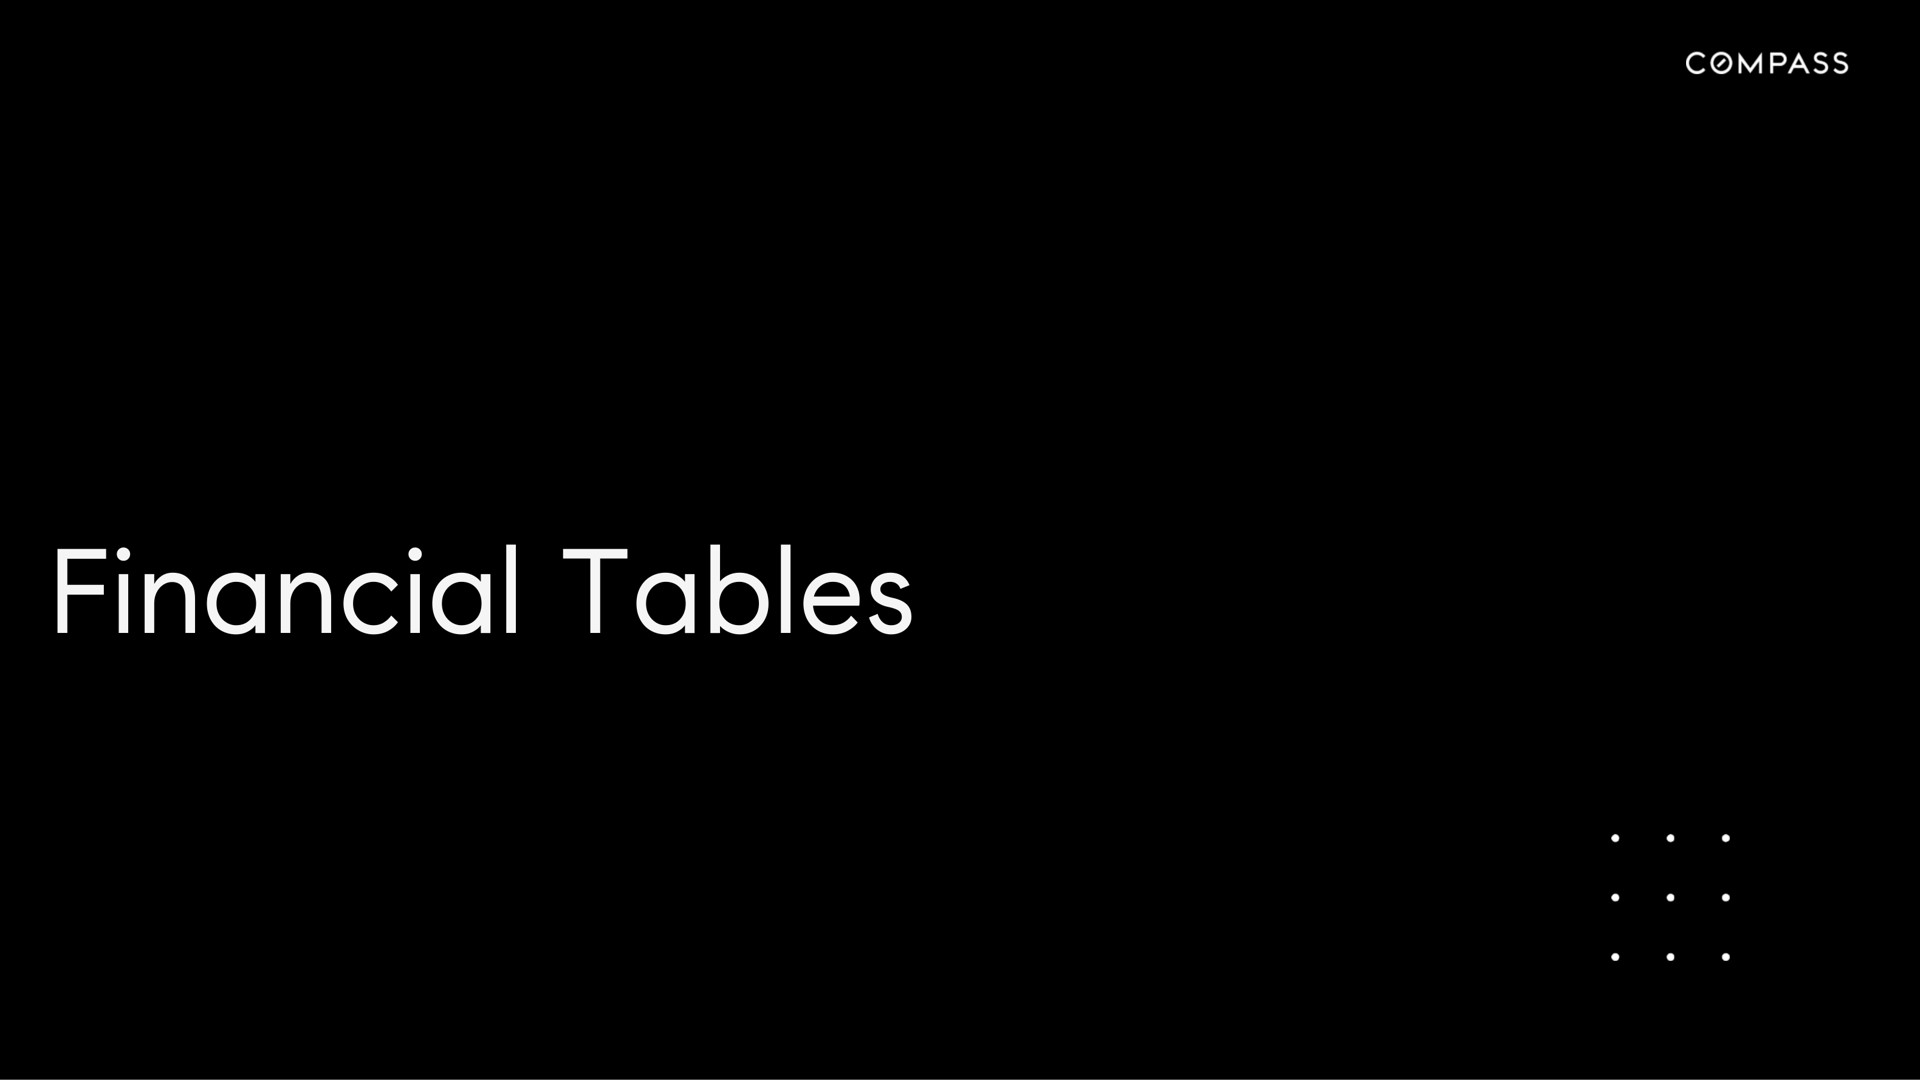 financial tables | Compass